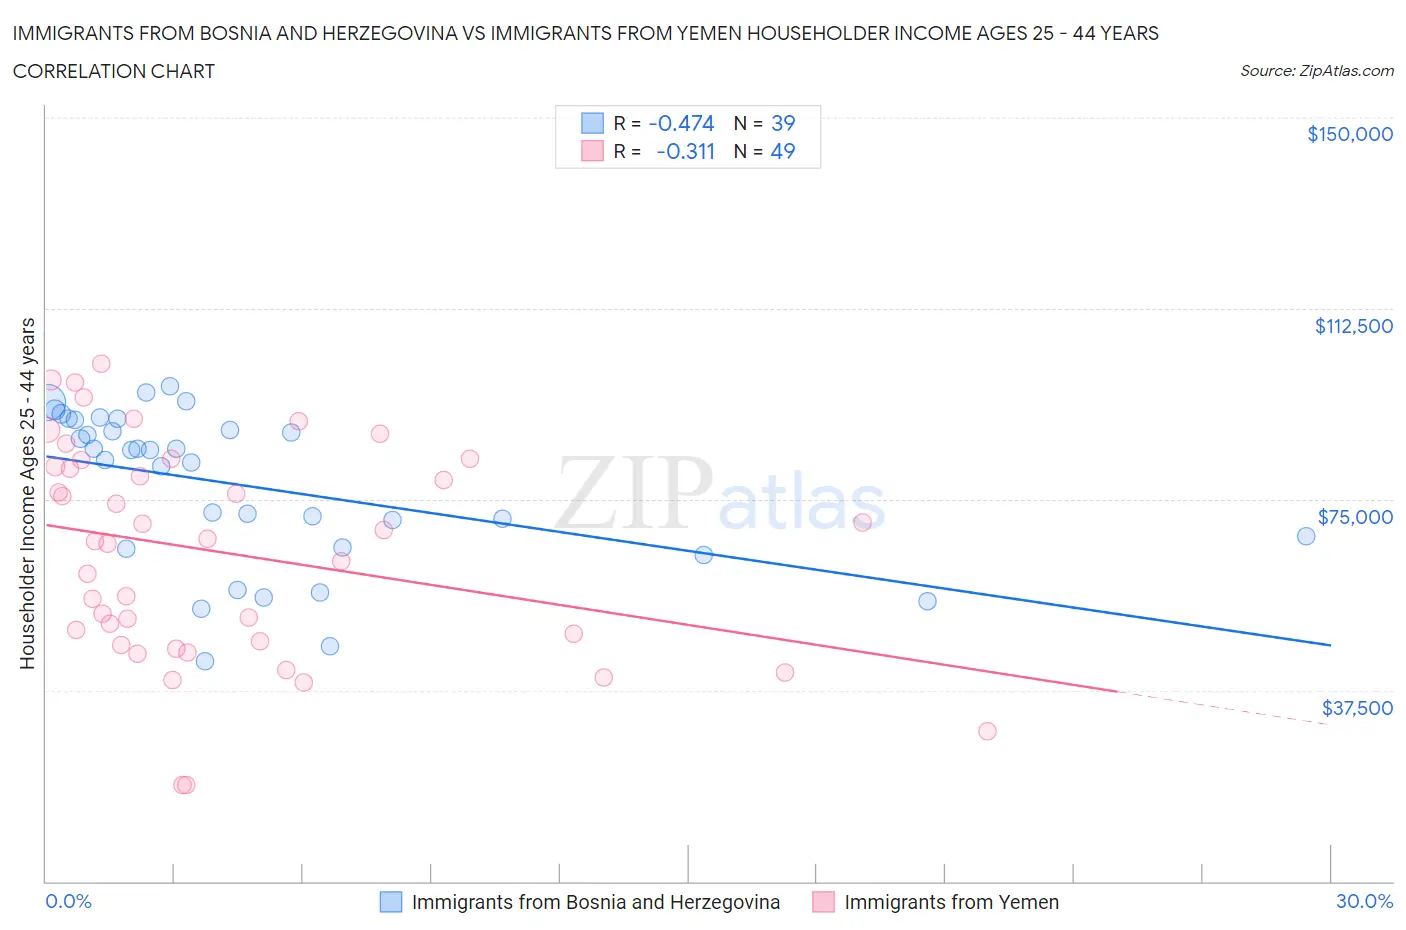 Immigrants from Bosnia and Herzegovina vs Immigrants from Yemen Householder Income Ages 25 - 44 years